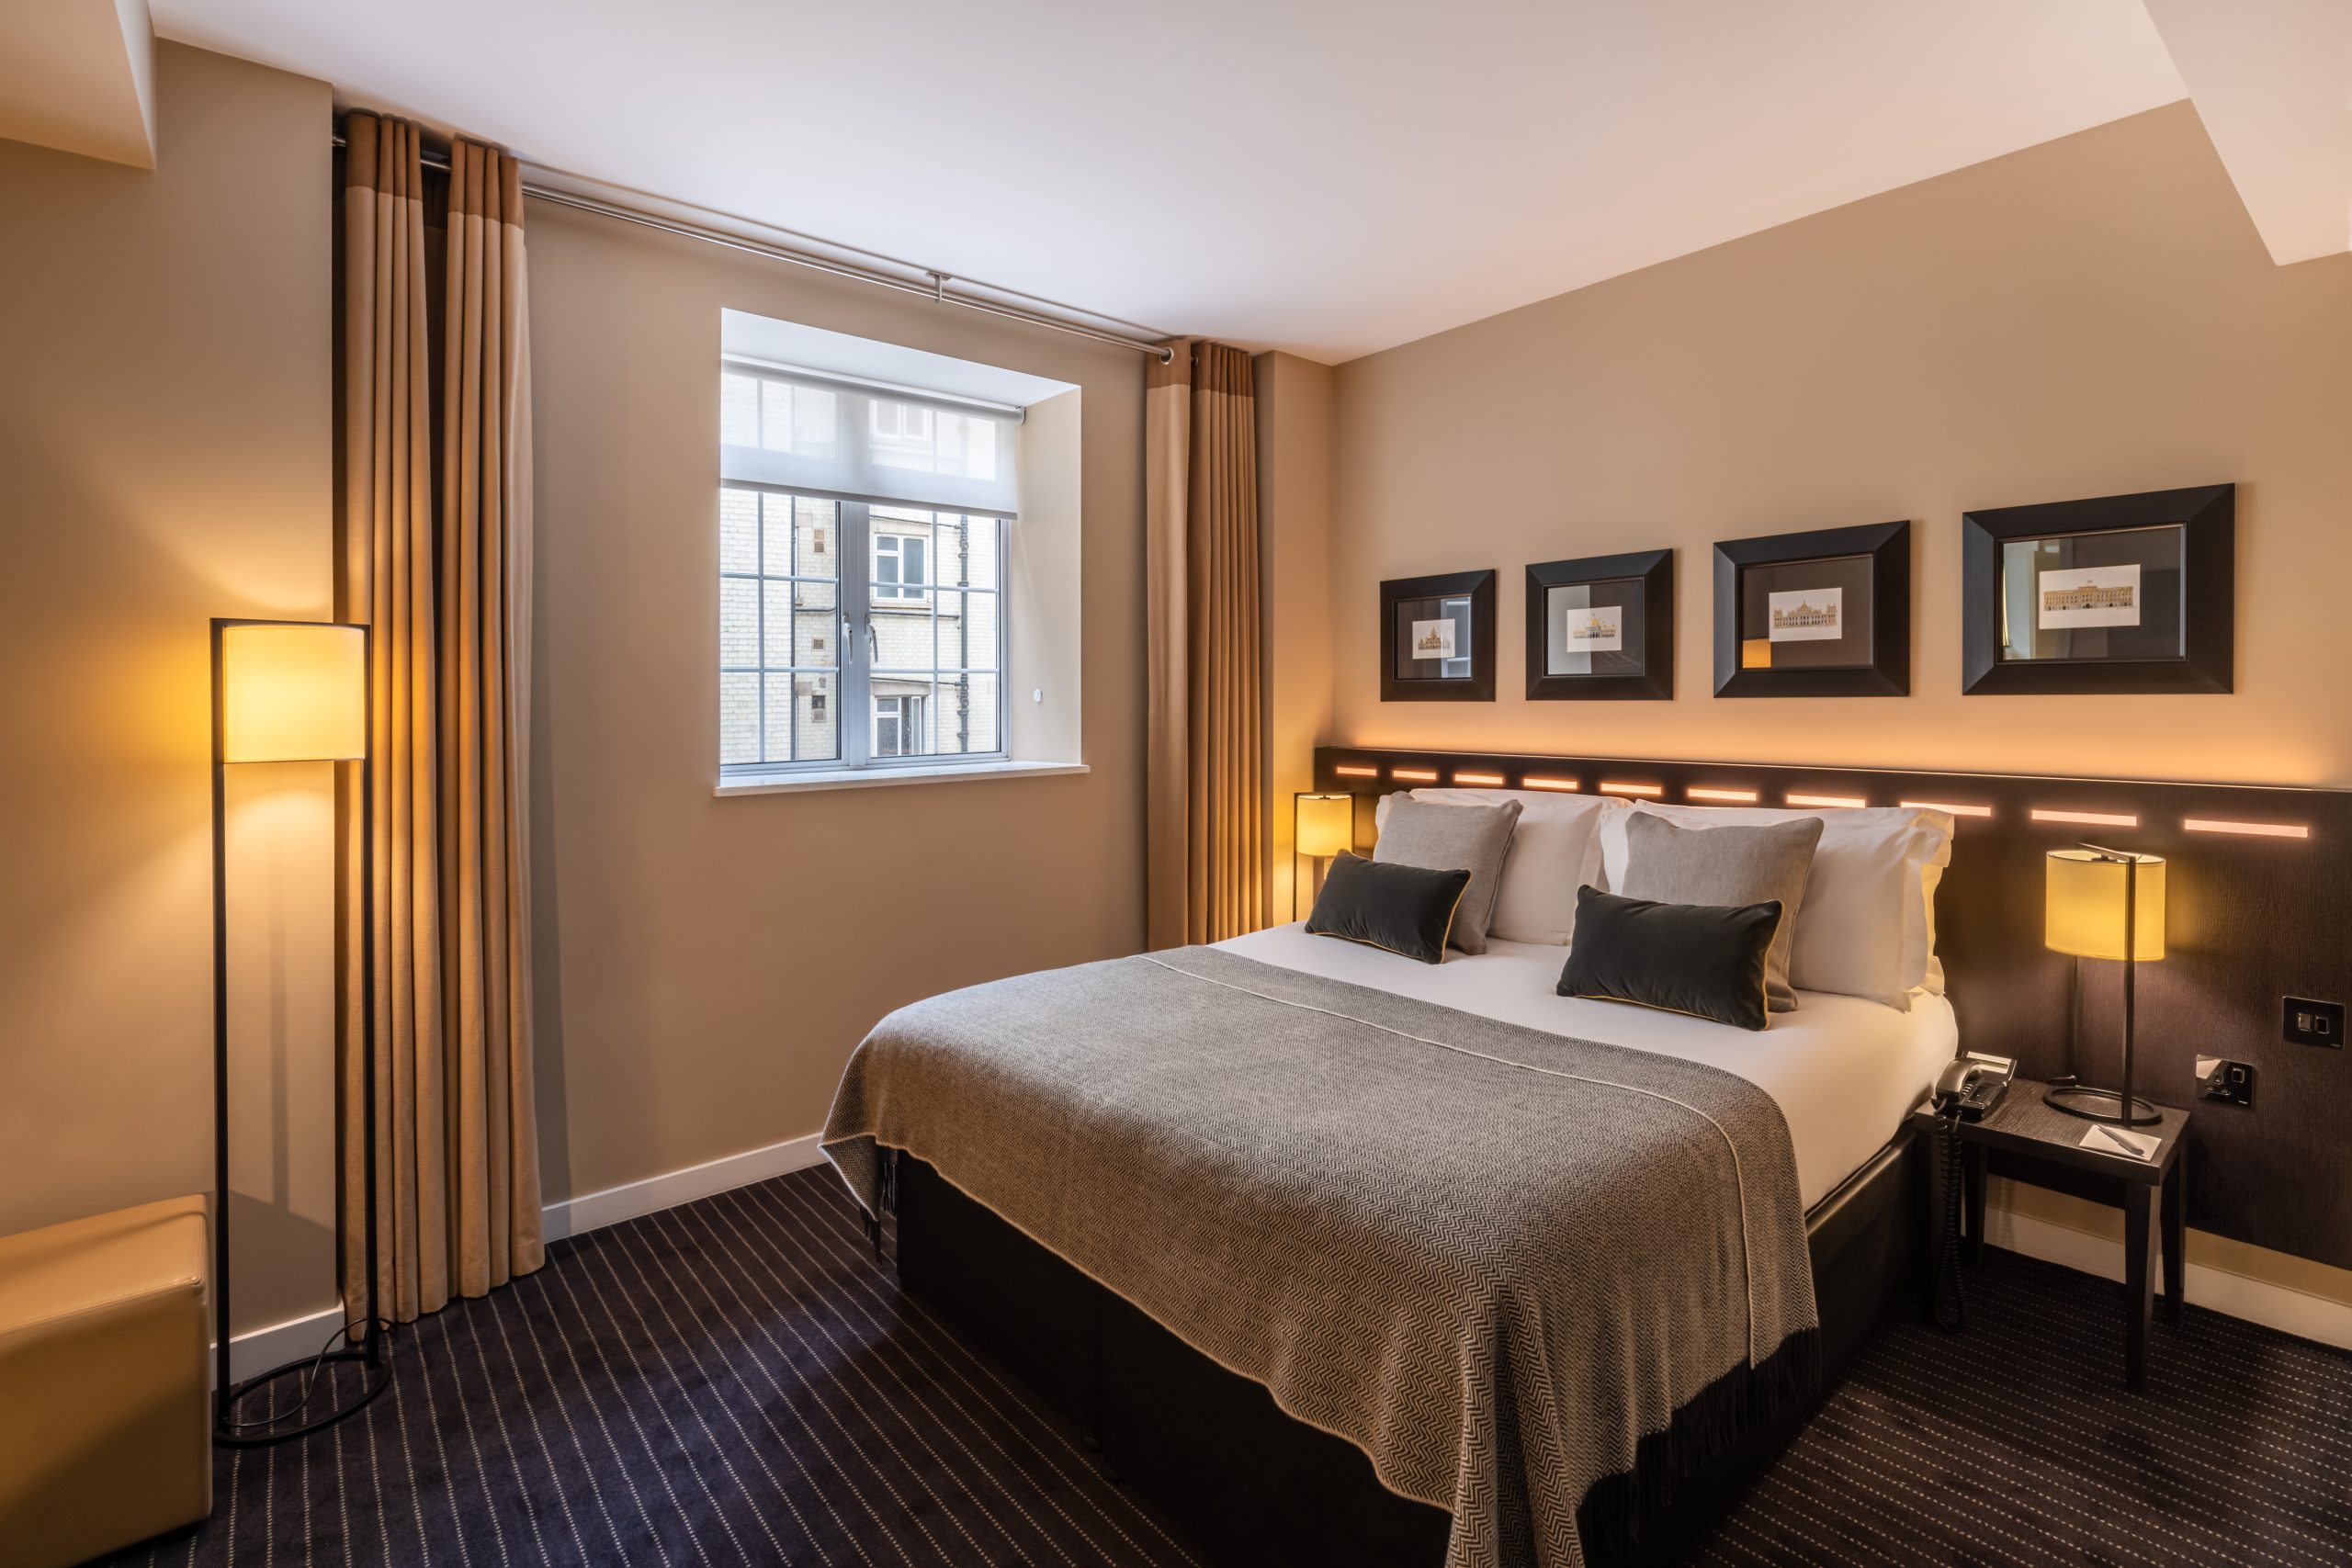 A suite with a double bed and bedside tables, located in Victoria.